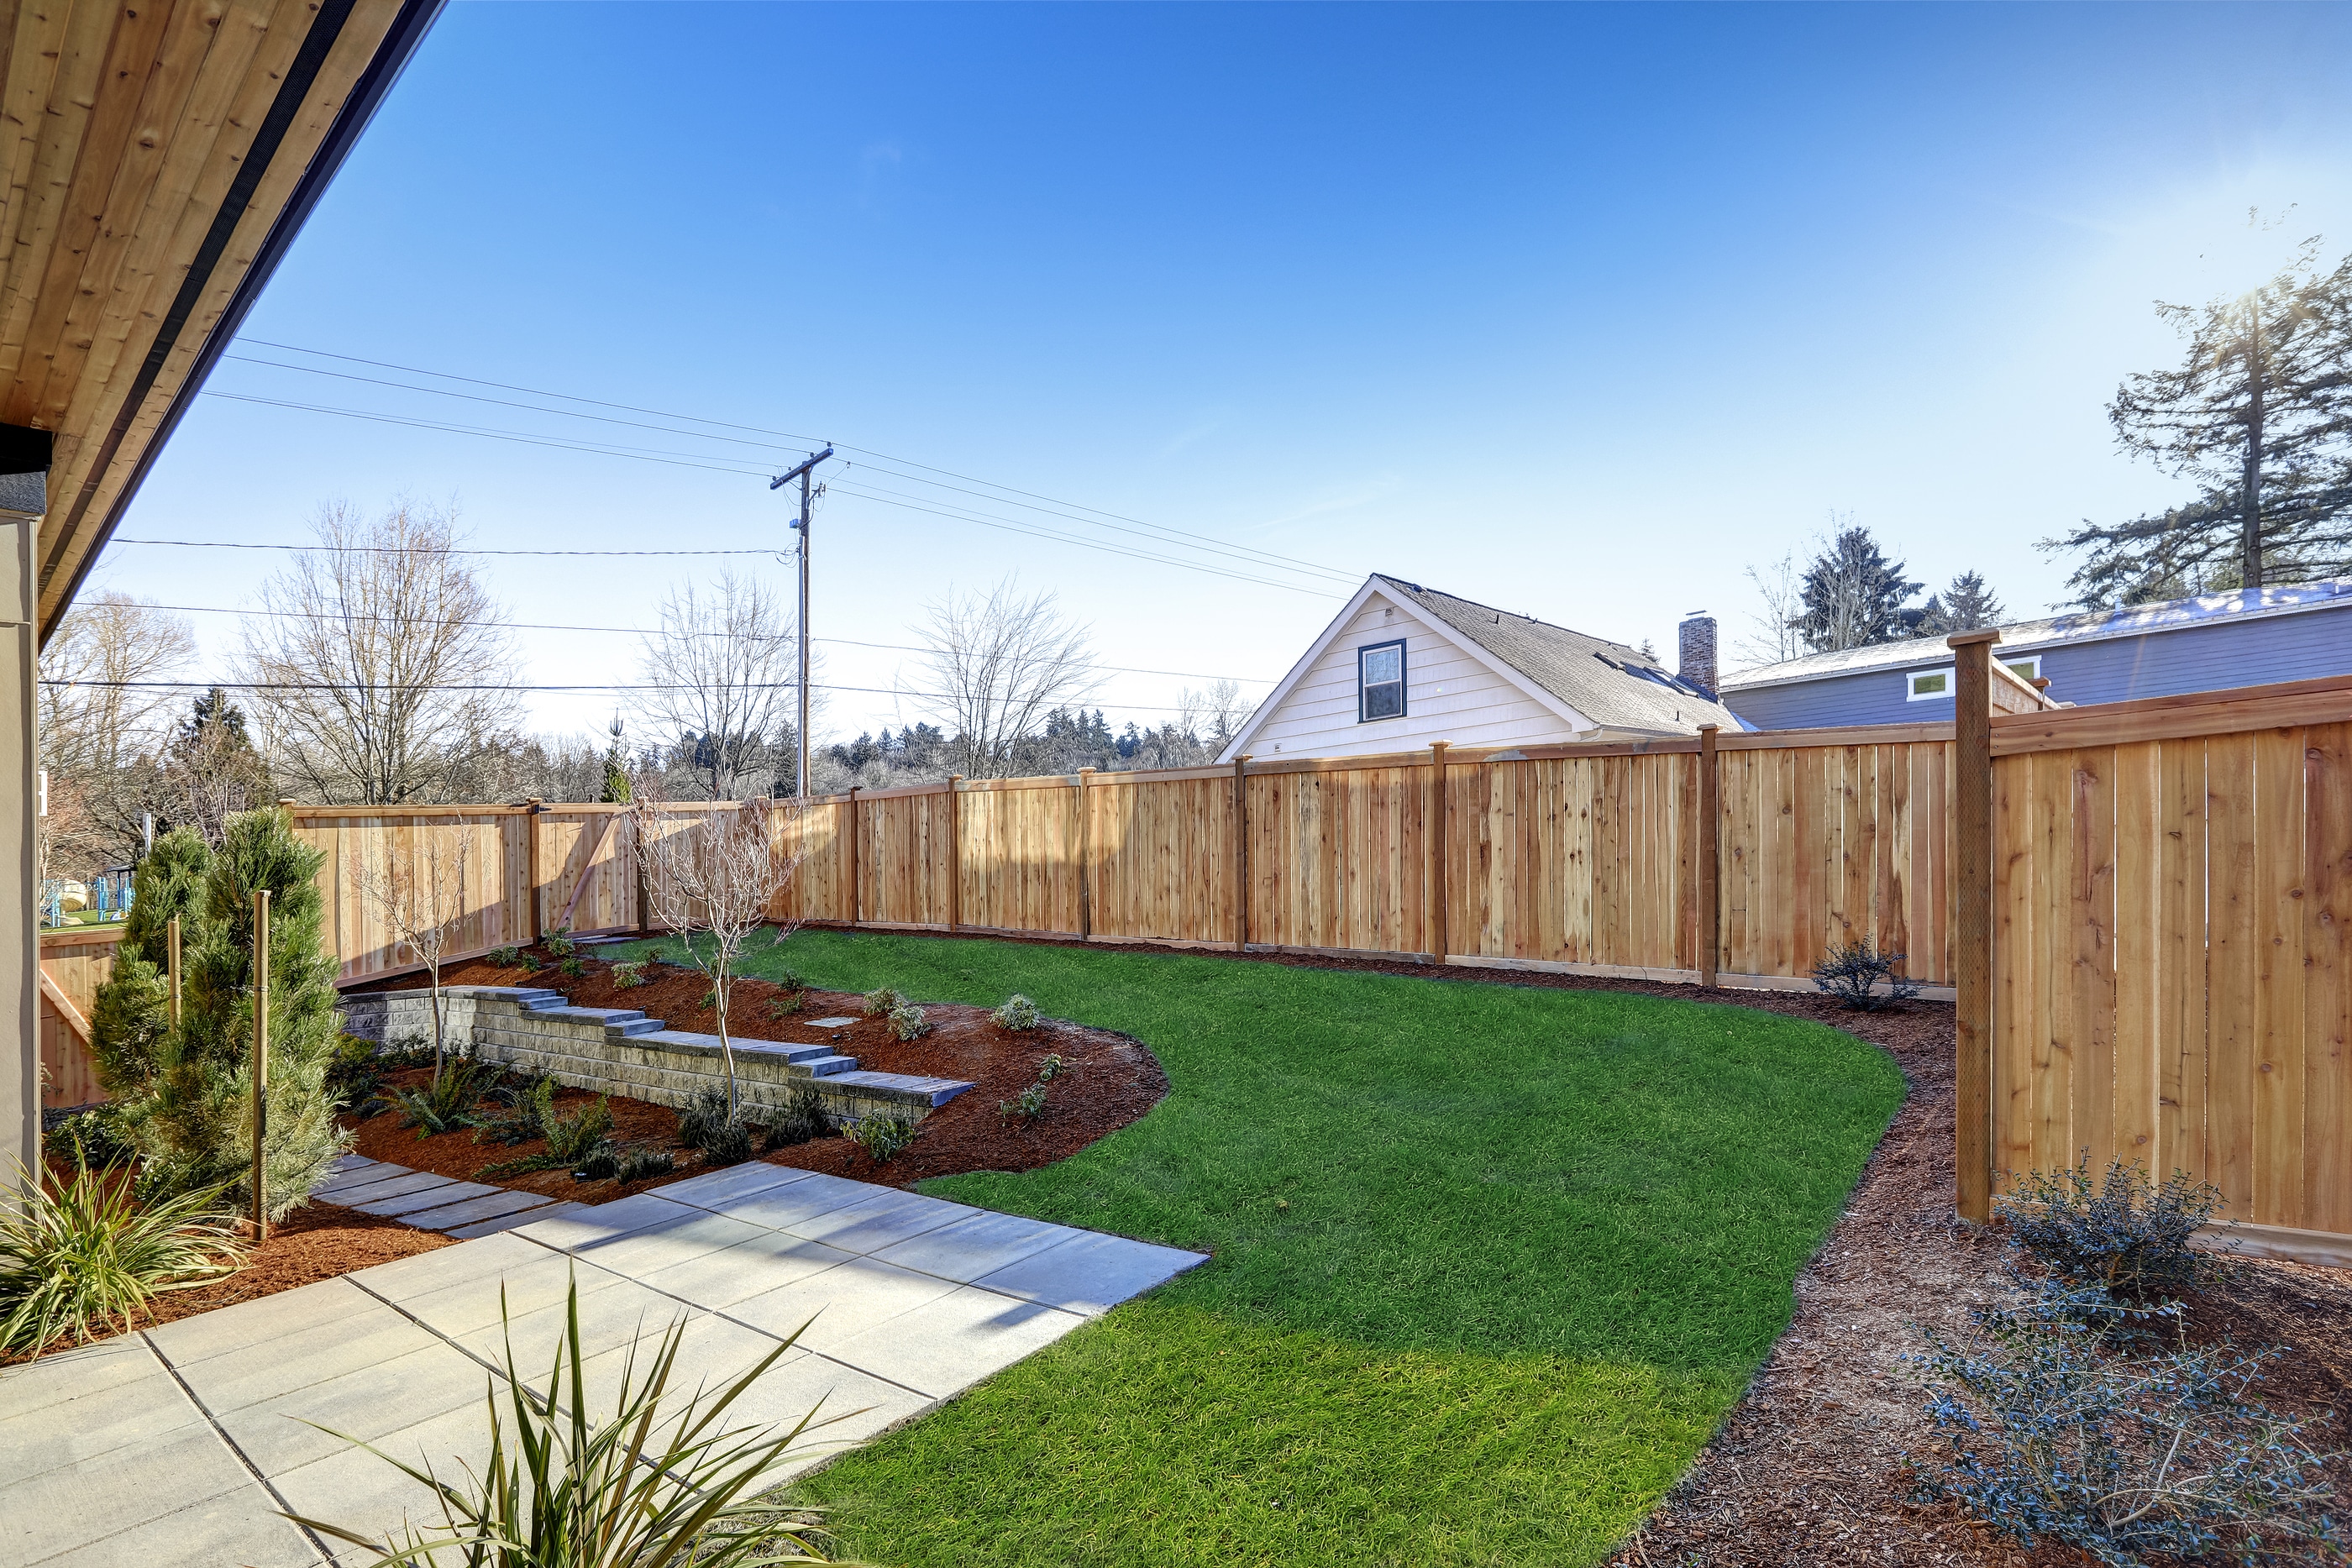 Amerifence Indianapolis Fence Repair and Fence Maintenance Tips